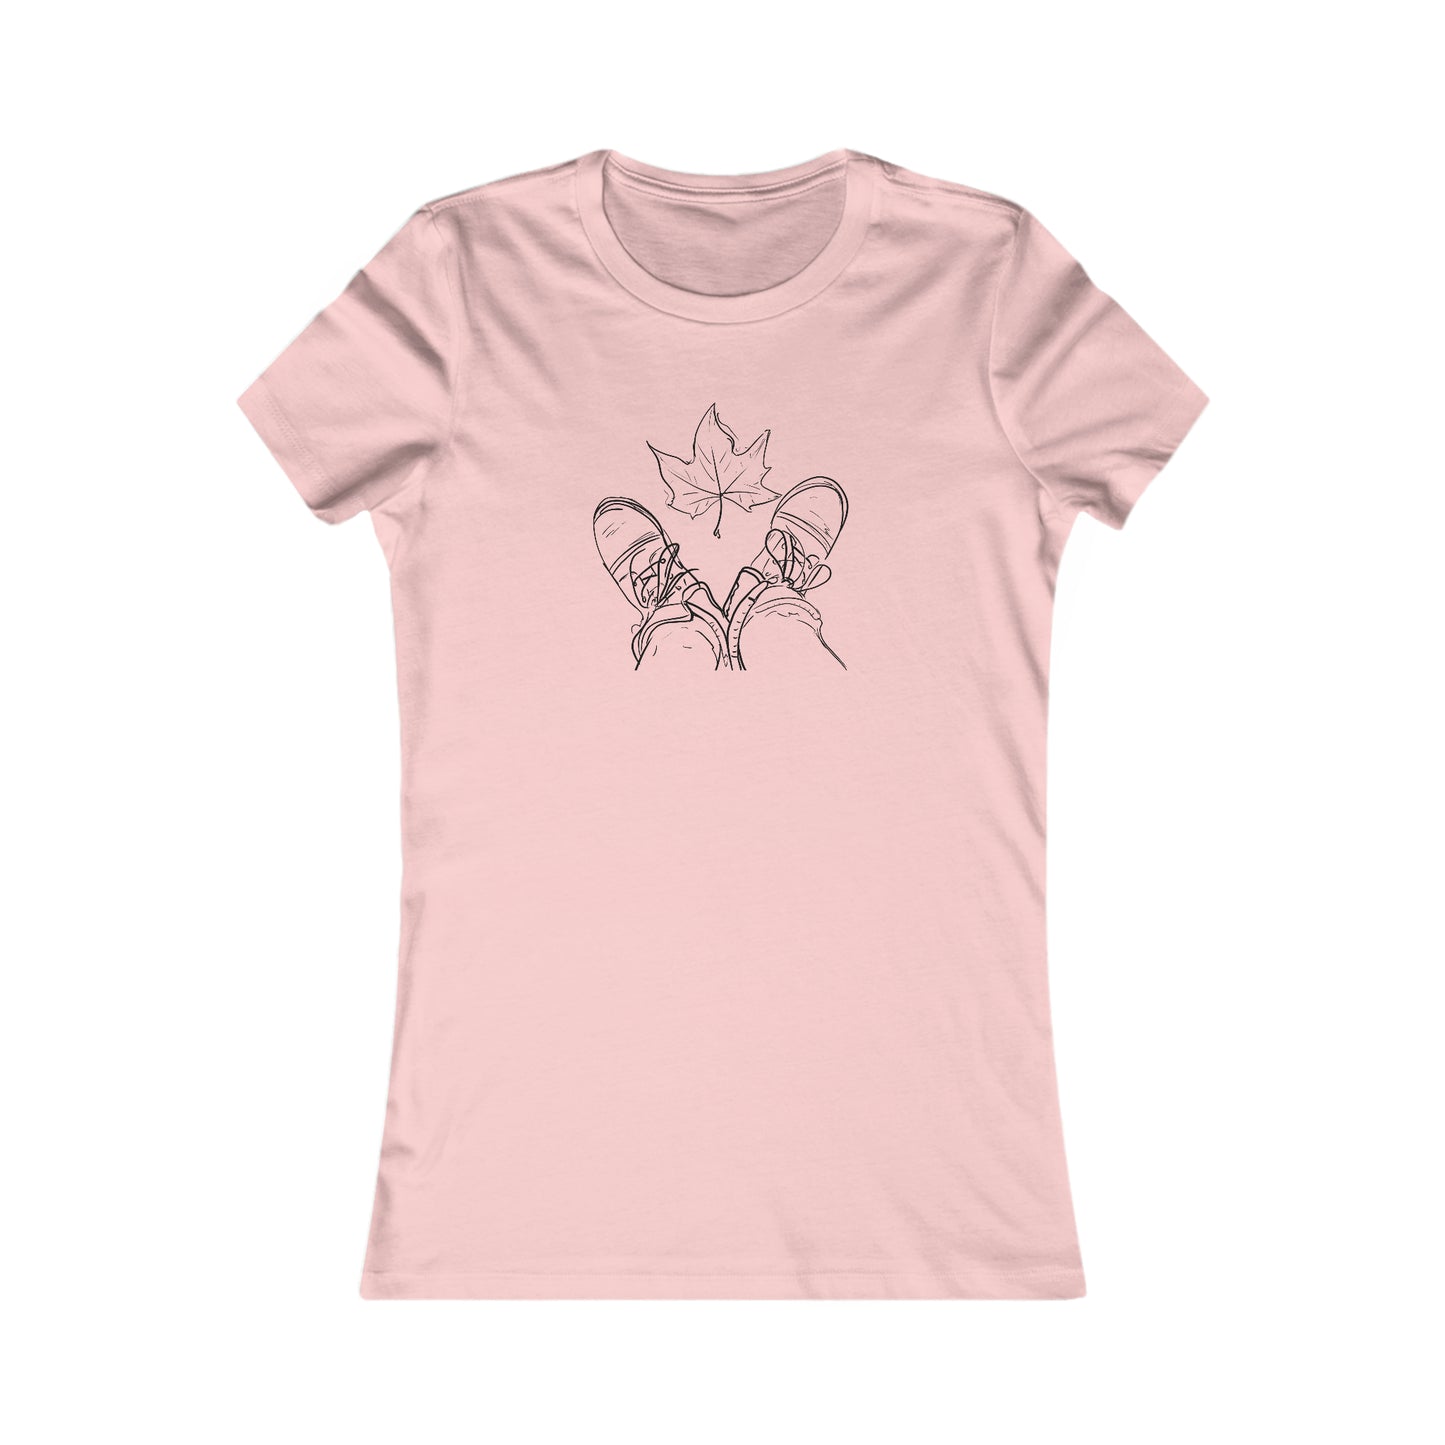 Fall Leaf and Boots Sketch - Women's T-Shirt